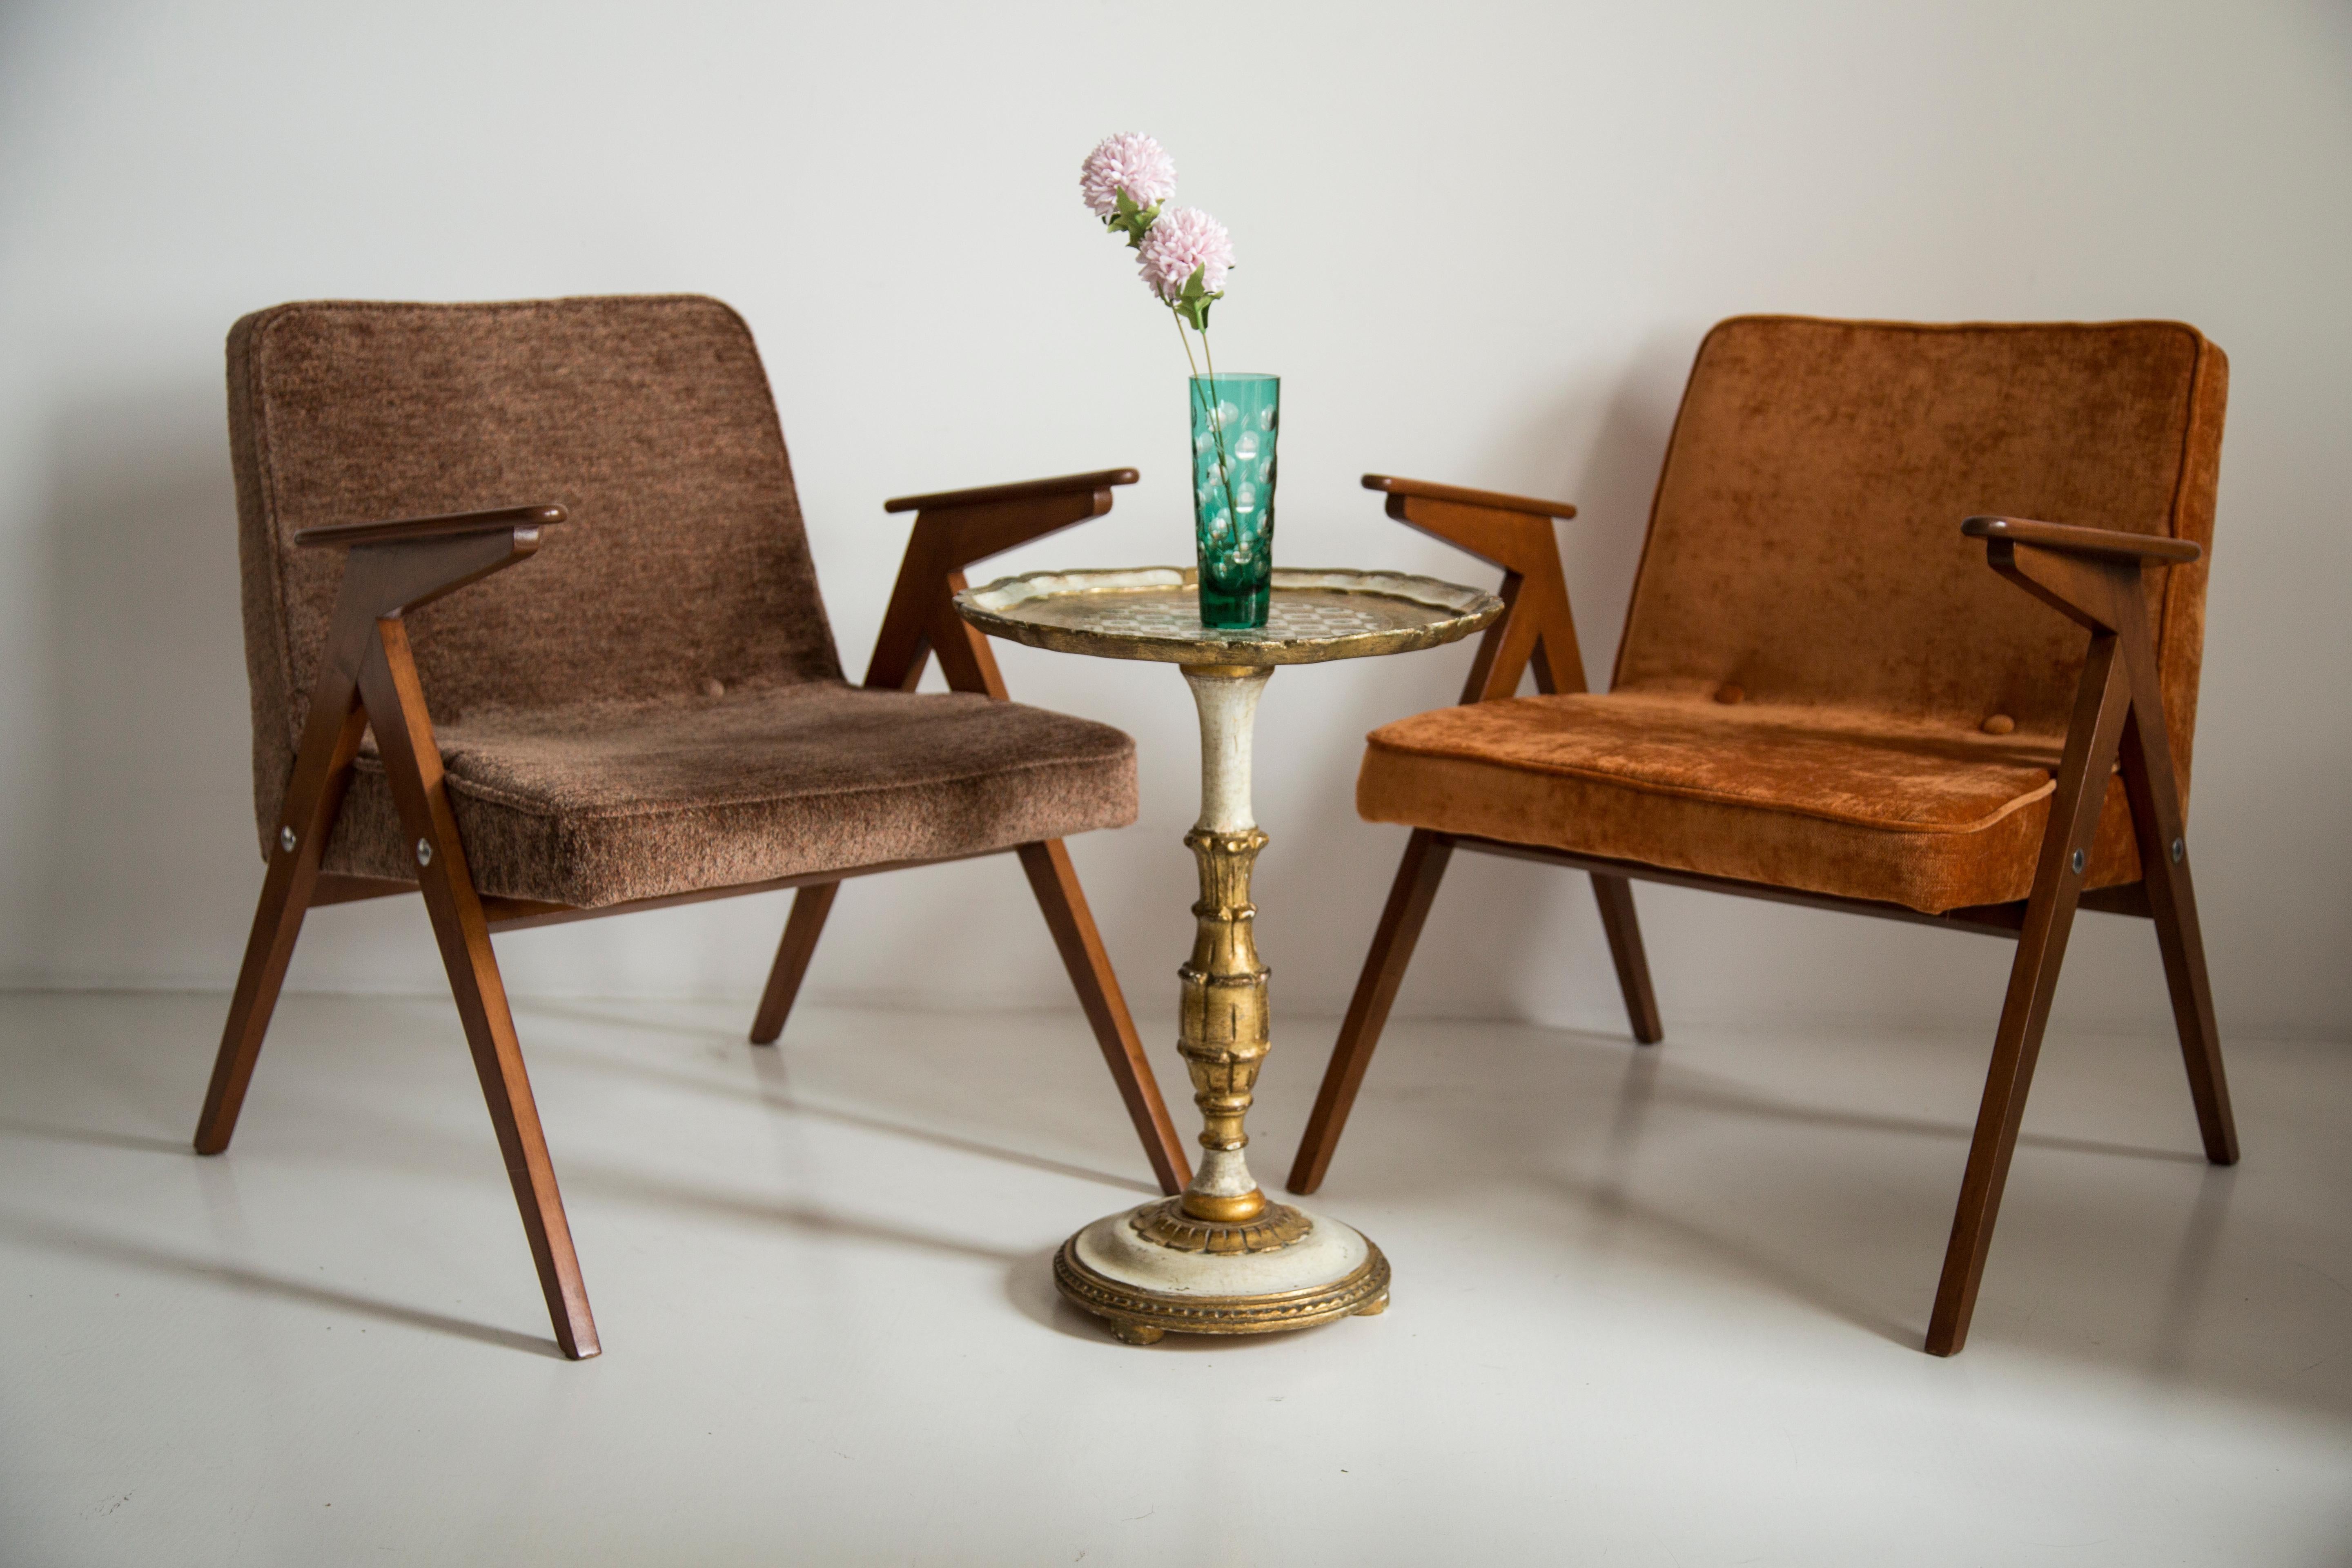 Polish Set of Two Midcentury Brown Bunny Armchairs, by Jozef Chierowski, Poland, 1960s For Sale